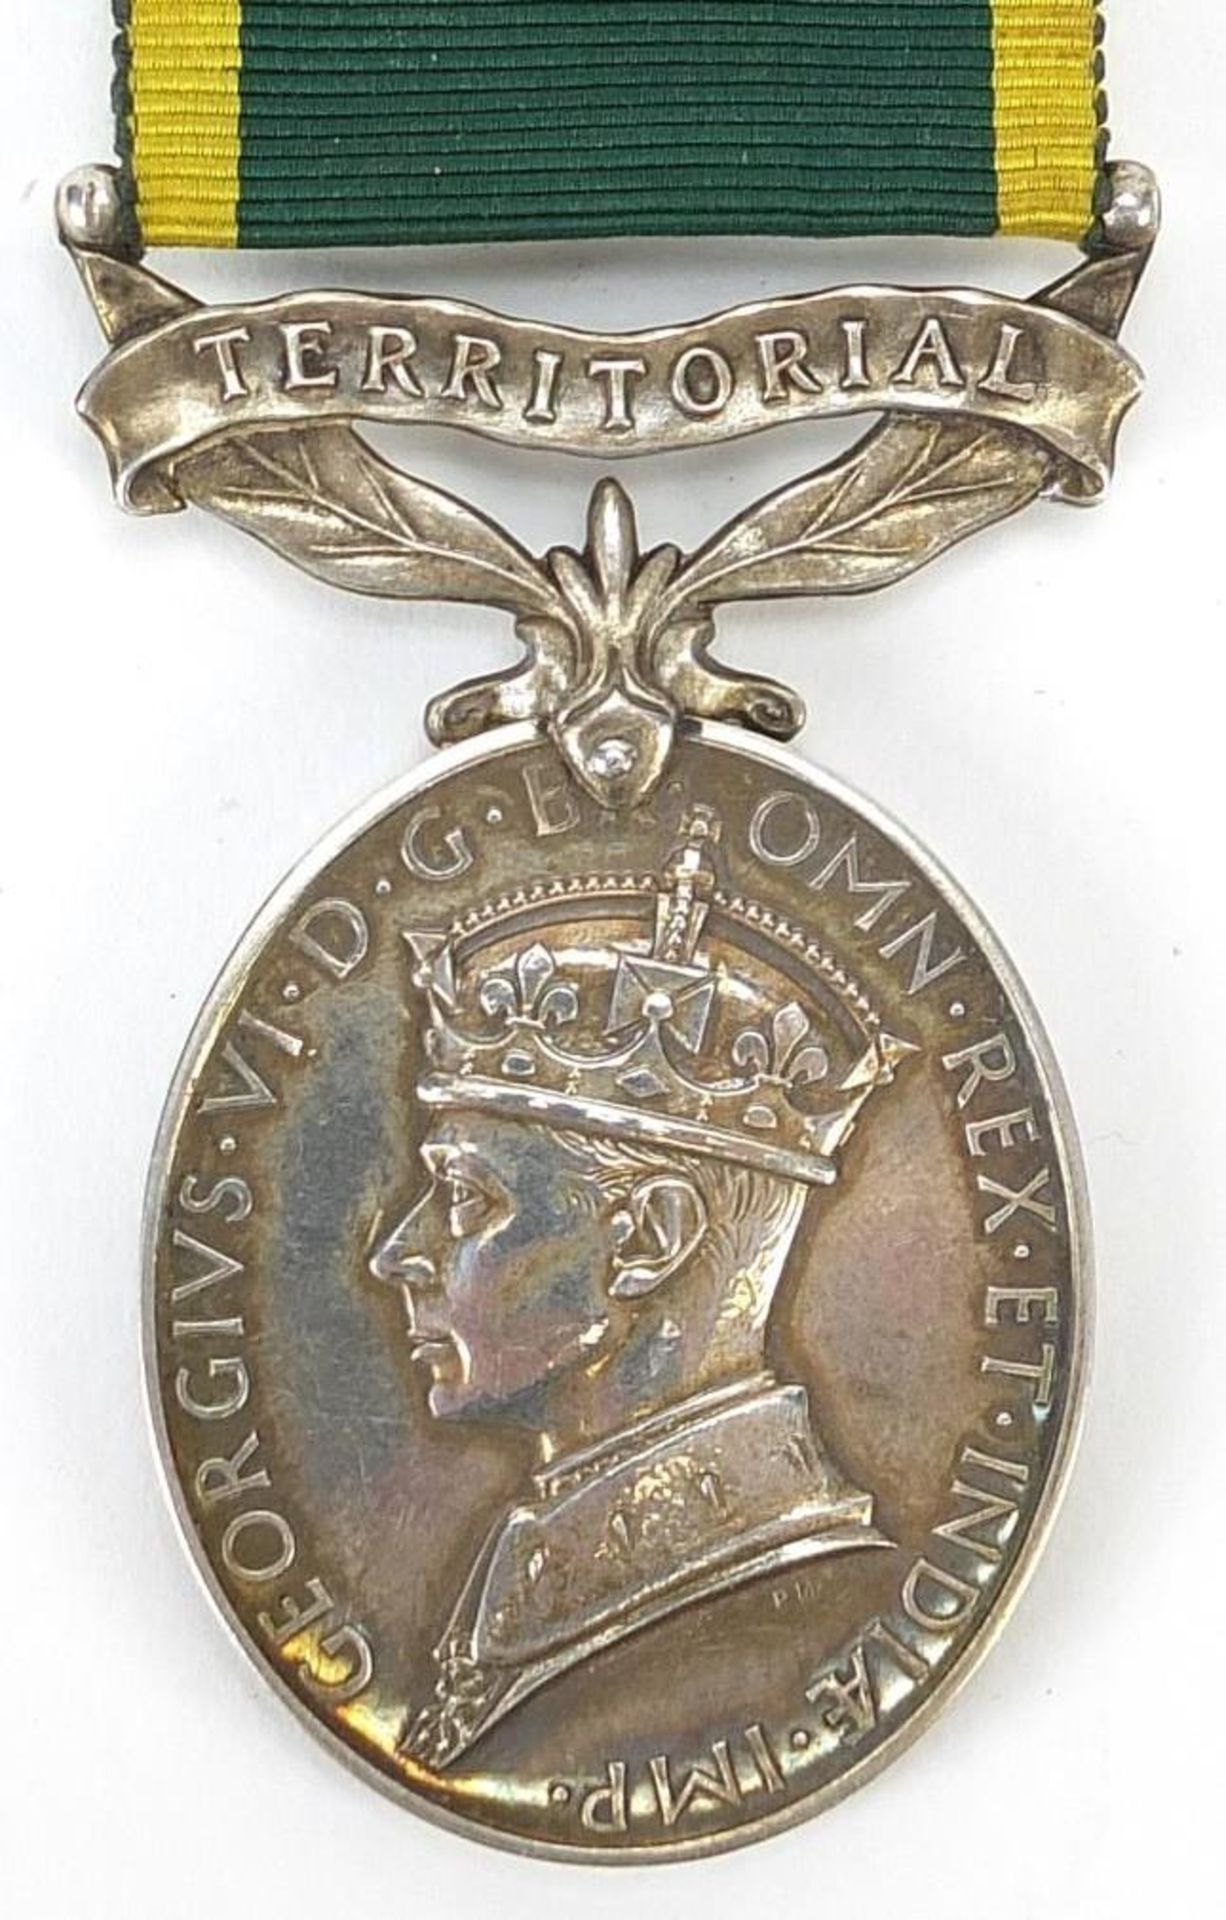 British military George VI Territorial Efficiency medal awarded to 854967GNR.A.V.HOOK.R.A.